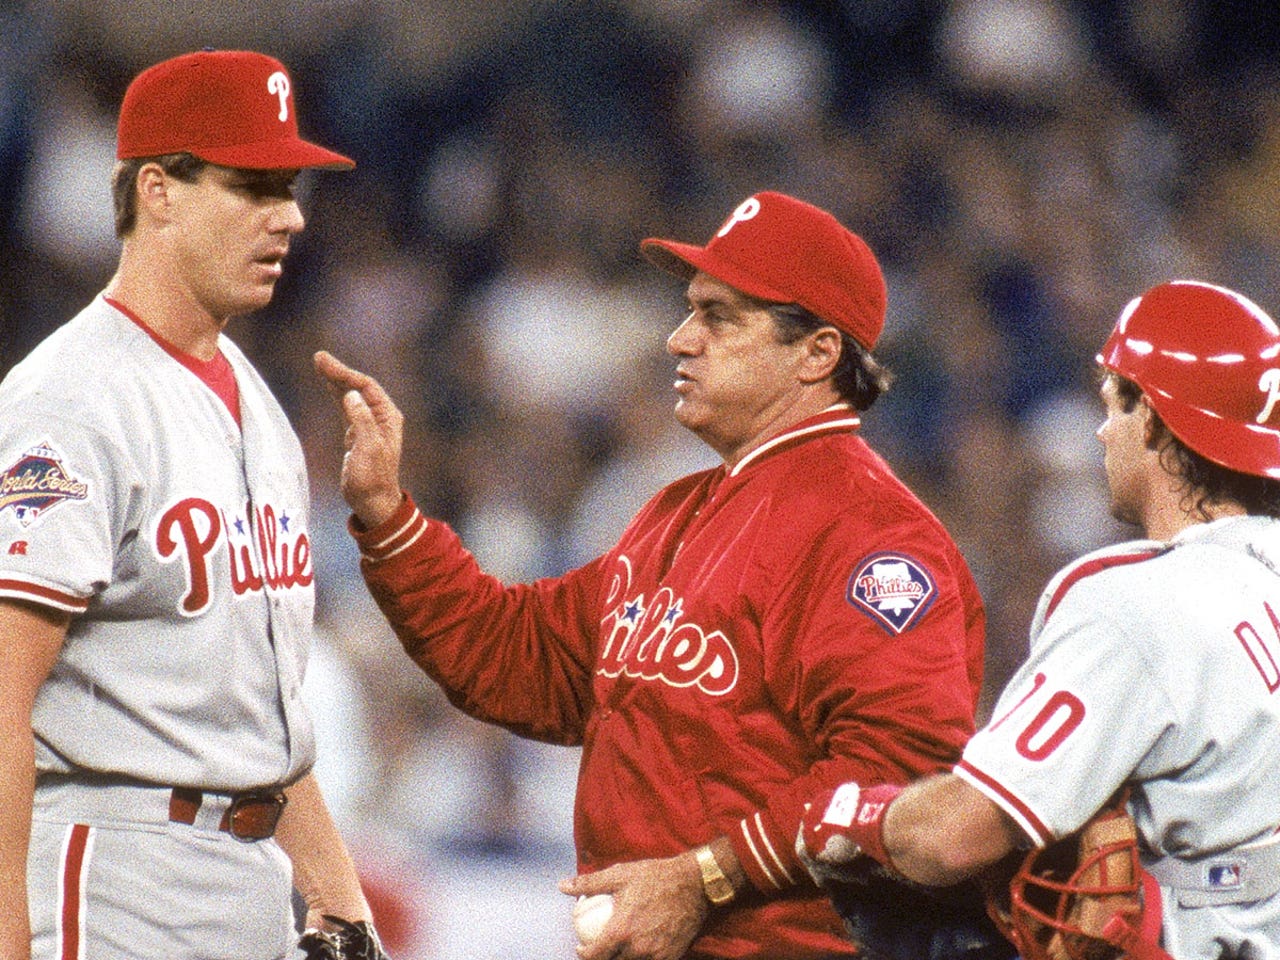 Ex-manager, former All-Star Fregosi dies after suffering stroke